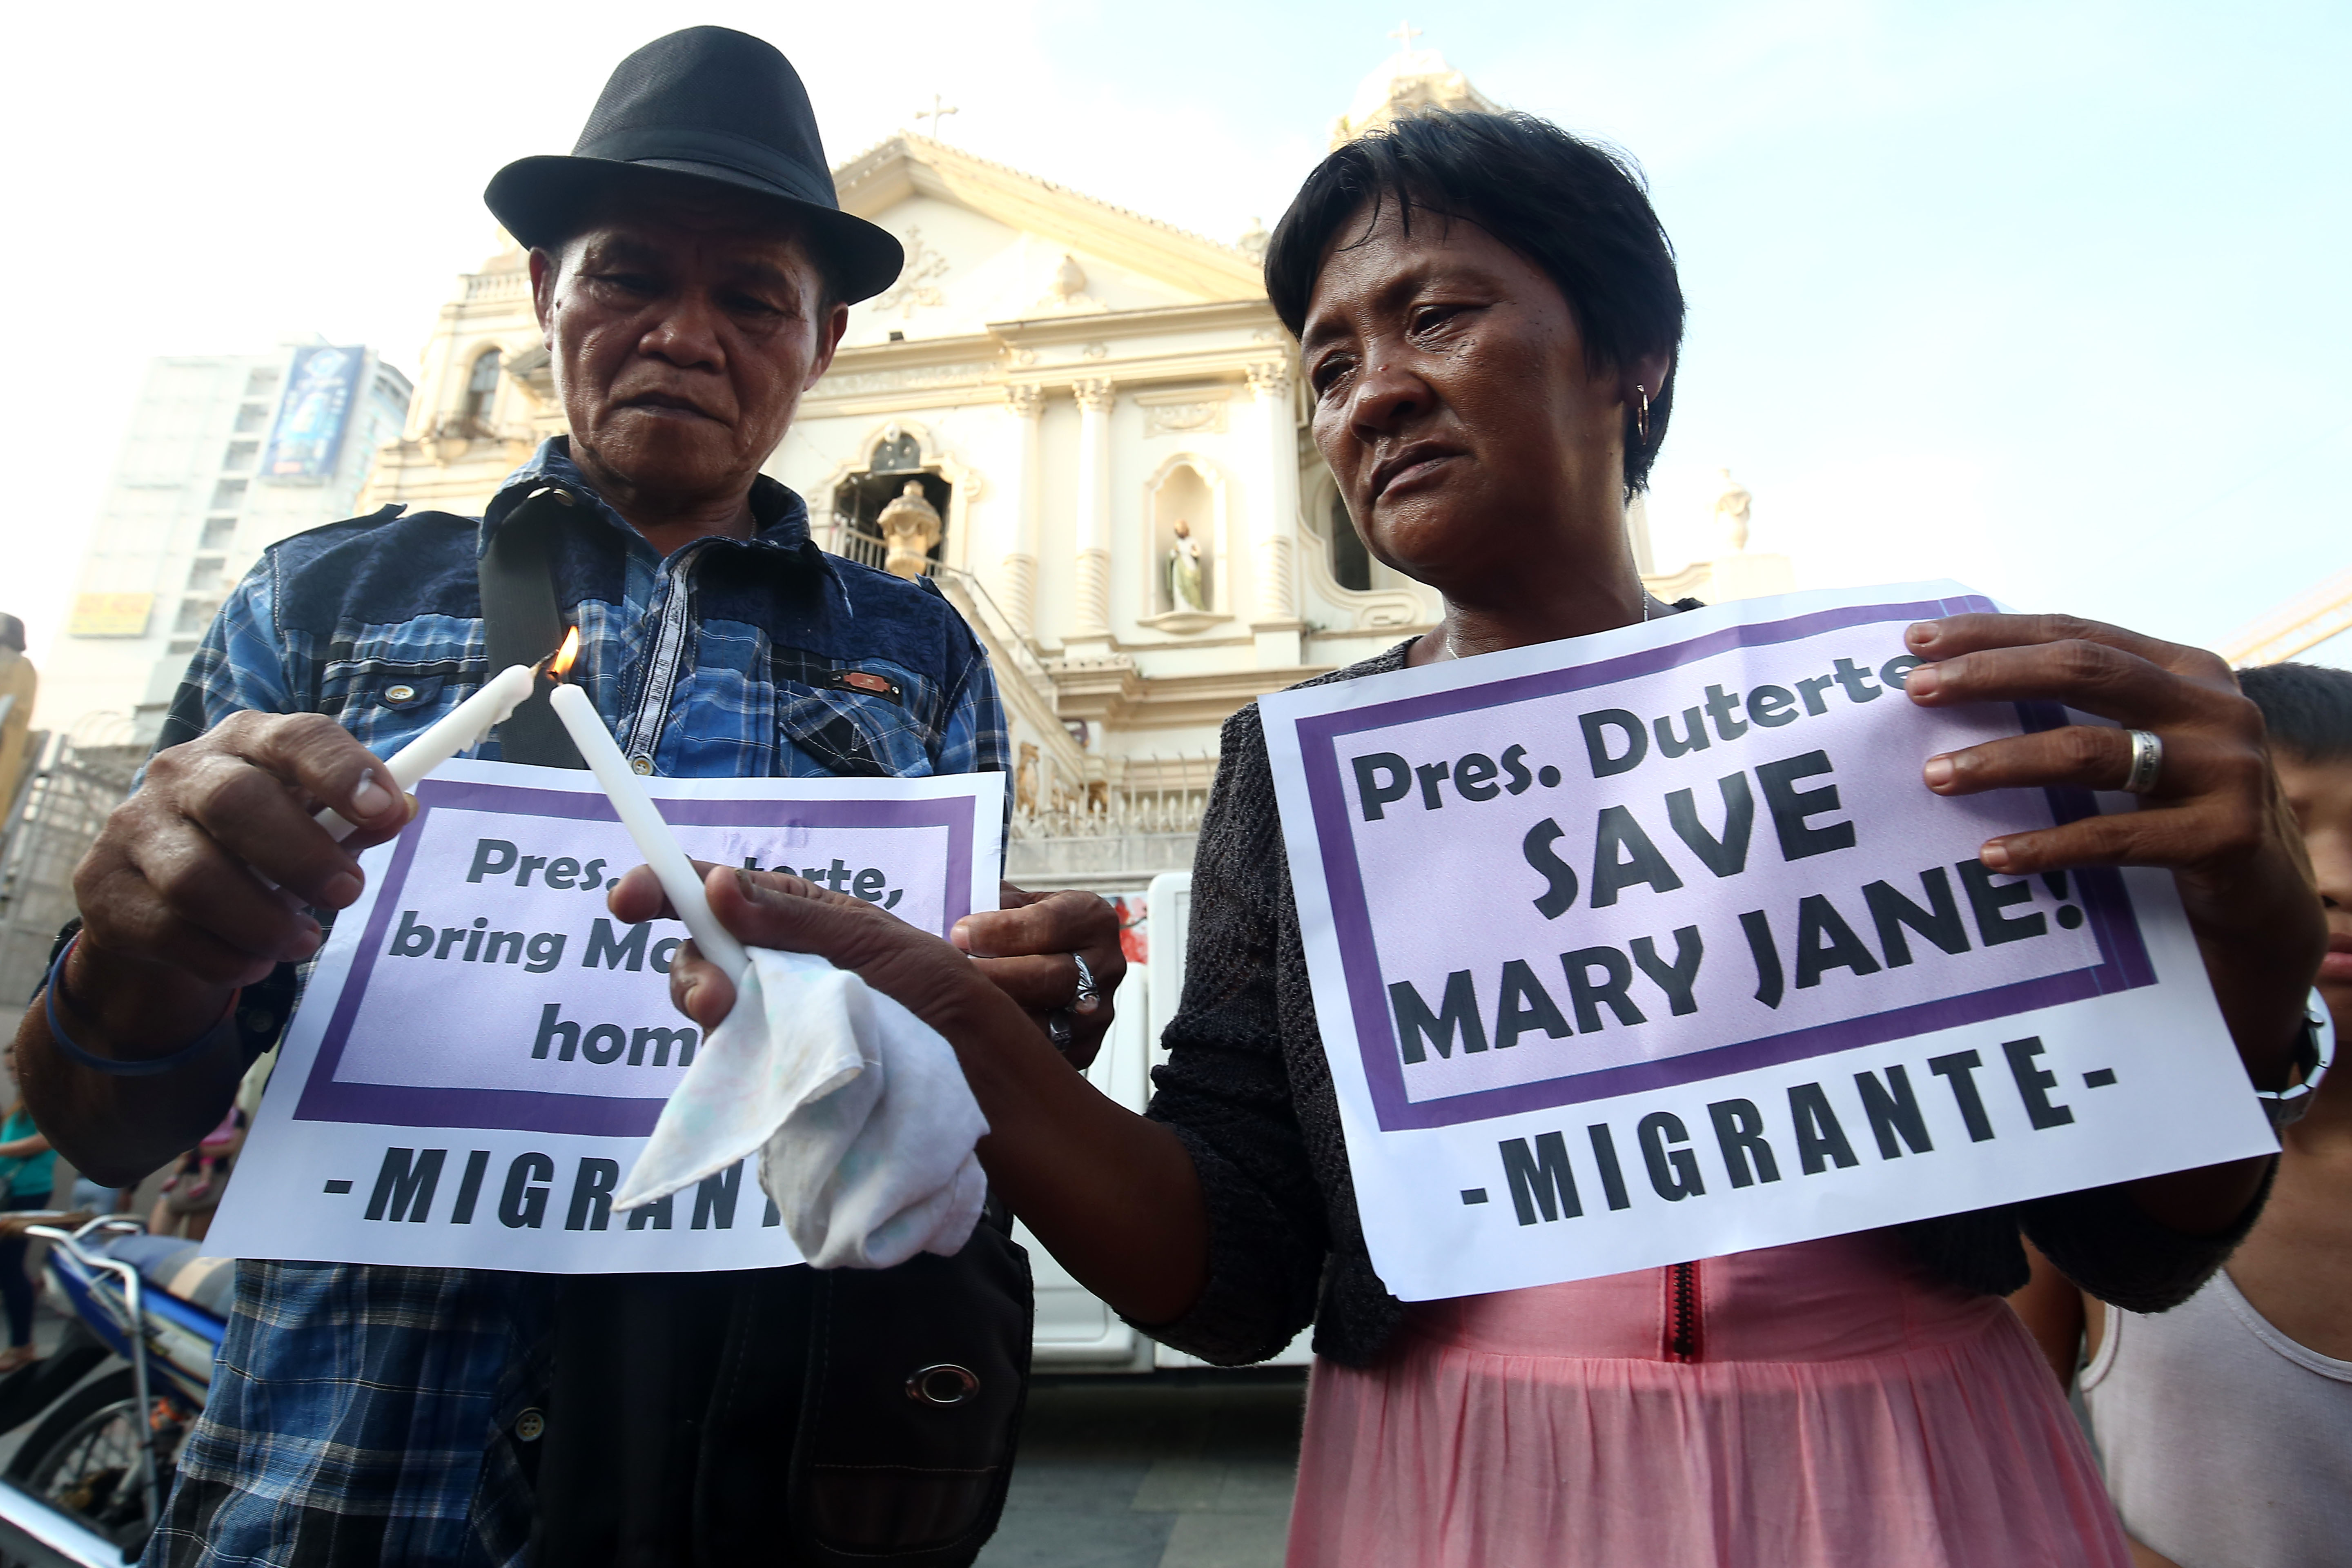 SAVE MARY JANE. Parents of OFW Mary Jane Veloso, Cesar and Celia, weep as they appeal to President Rodrigo Duterte to help their daughter who is facing death sentence in Indonesia for illegal drug trade, during a candle lighting rally at the Plaza Miranda in Quiapo, Manila on Thursday, September 8, 2016. Photo by Ben Nabong/ Rappler 